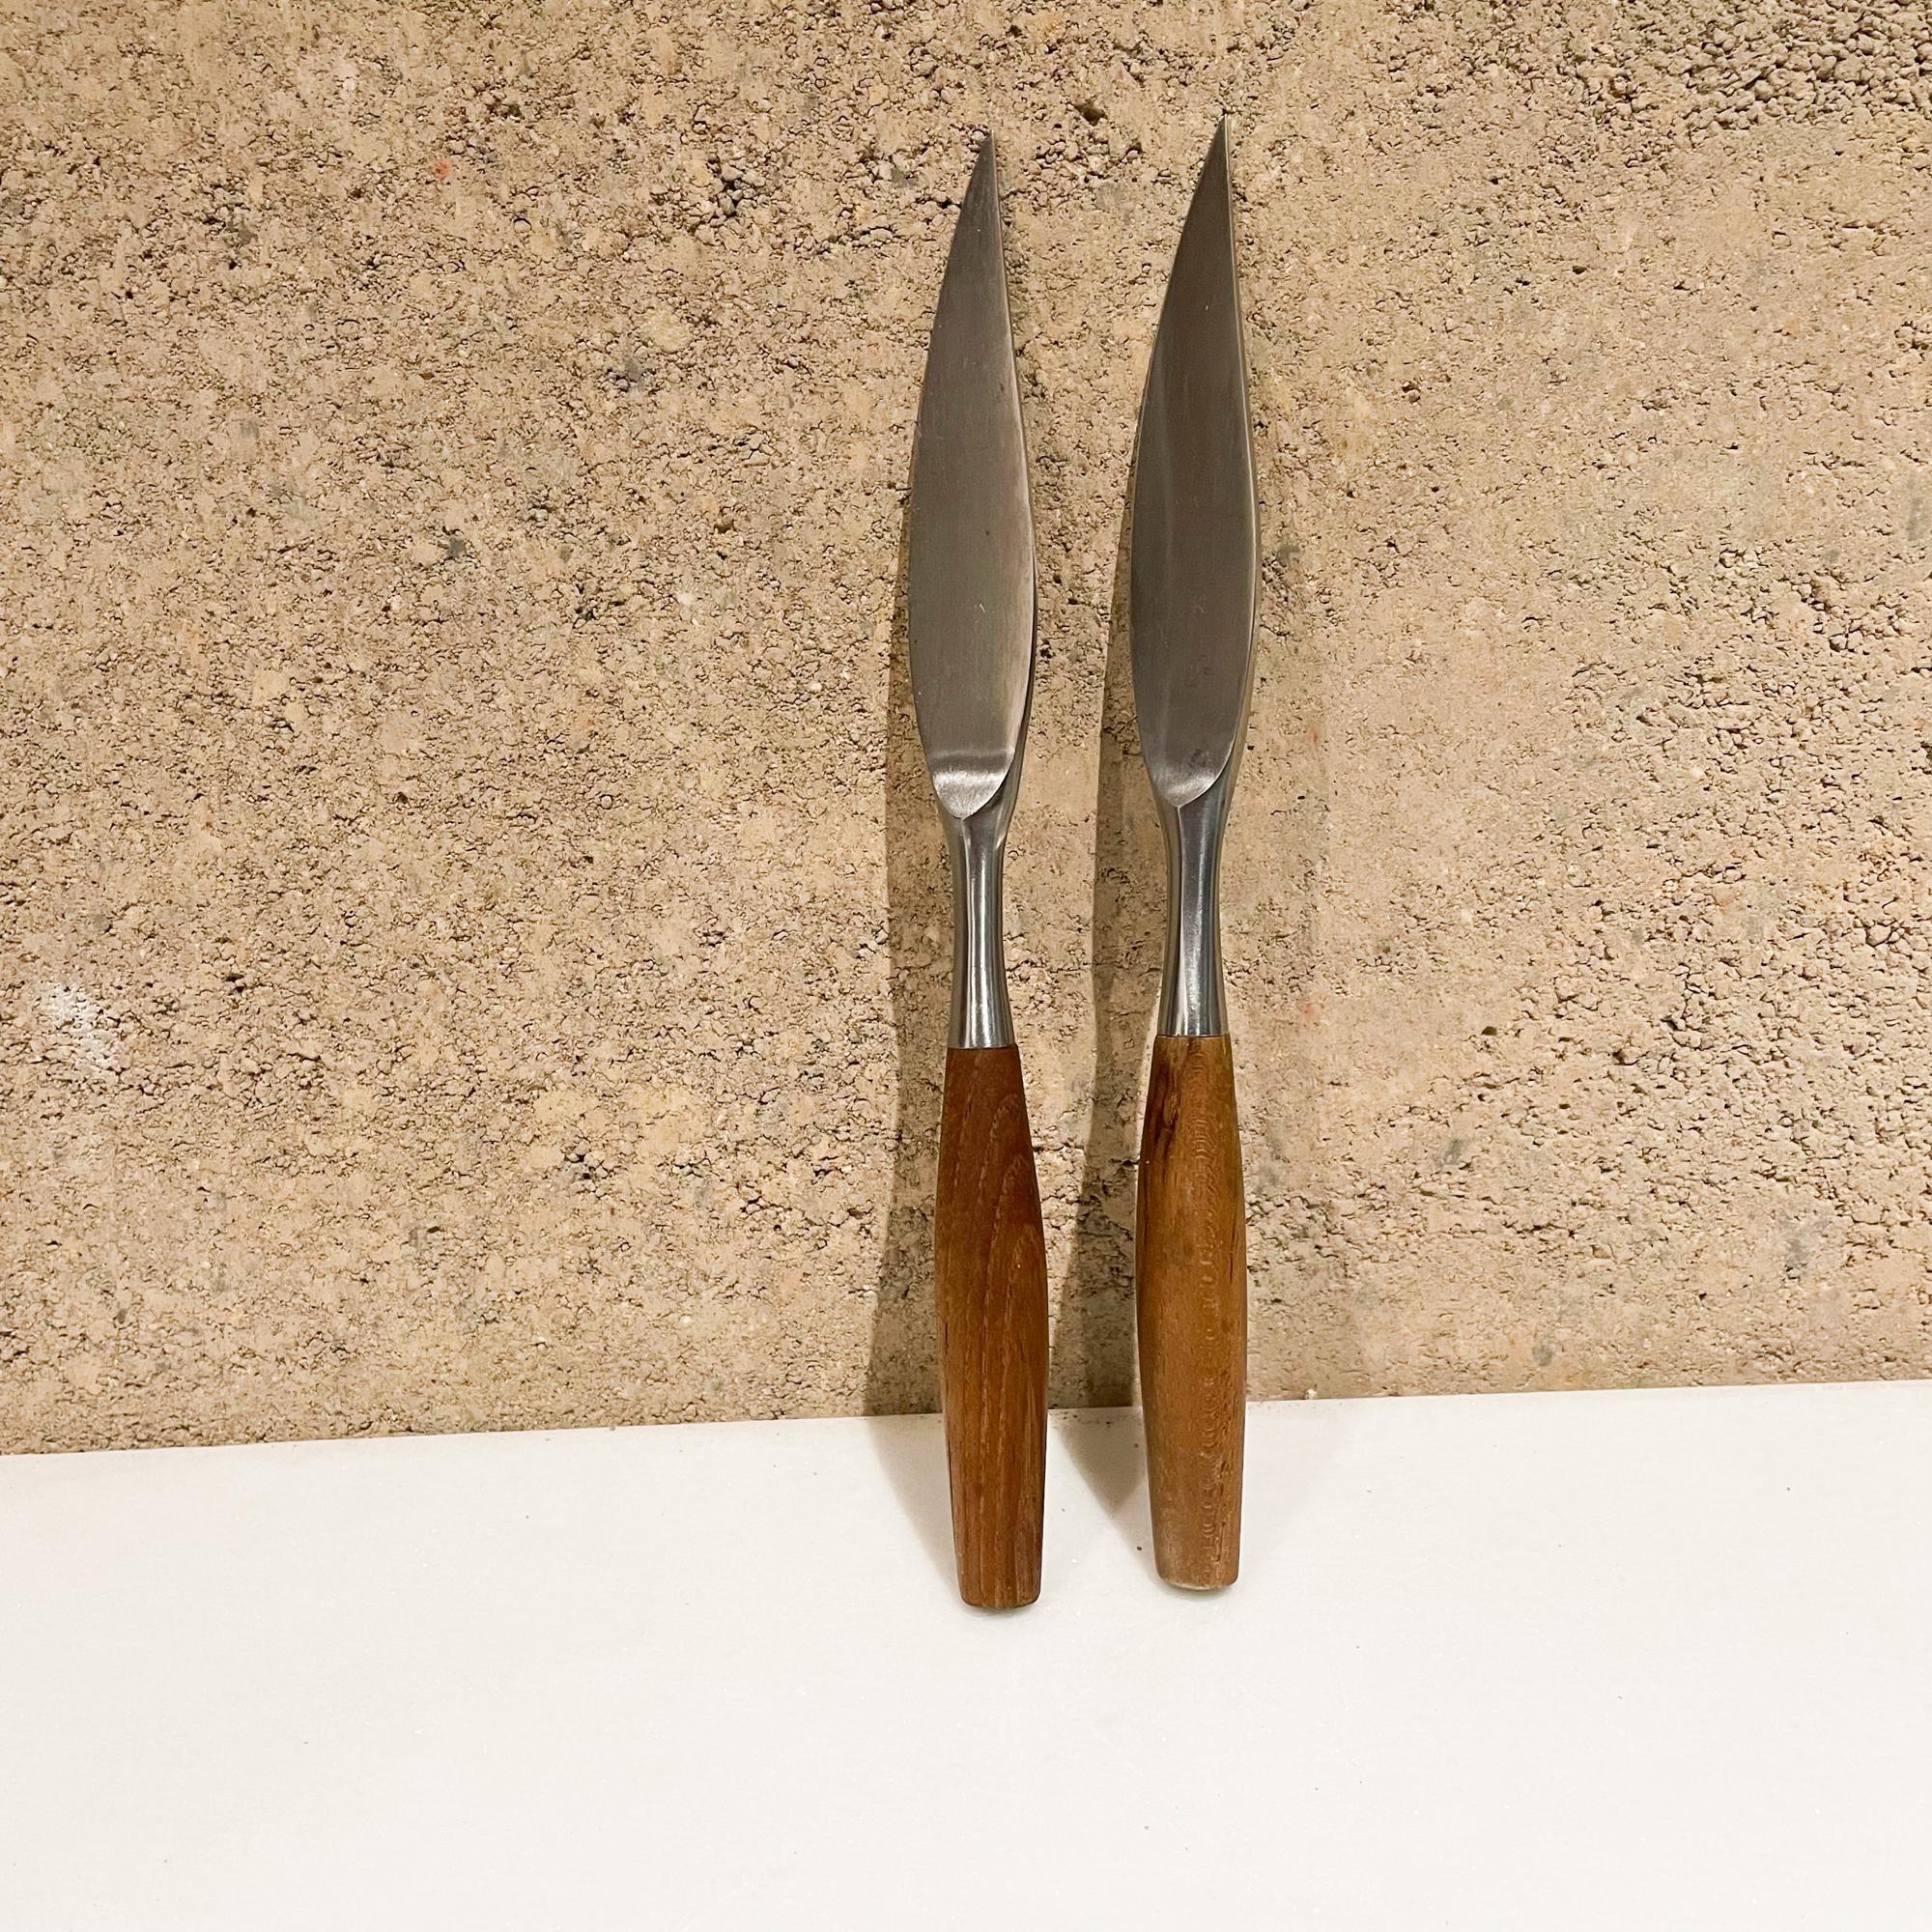 Set of two steak knives
Dansk Fjord Designs from Germany by Jens Quistgaard designed 1954
Maker stamped.
Original unrestored preowned use vintage condition. See our images please.
Designed in Teak Wood and Stainless Steel
Measures: 8.5 L x .63